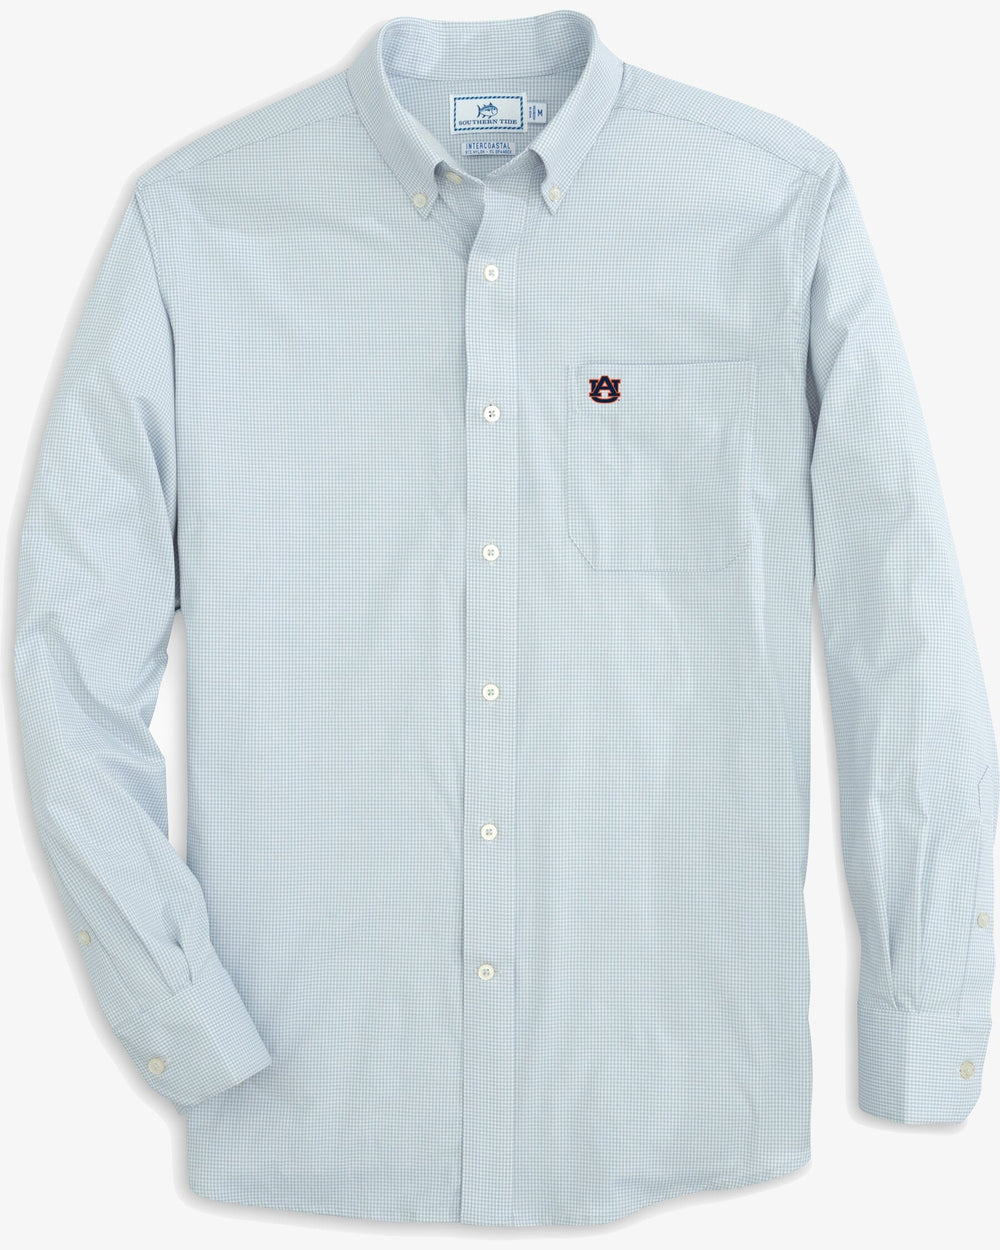 The front view of the Men's Navy Auburn Tigers Gingham Button Down Shirt by Southern Tide - Slate Grey